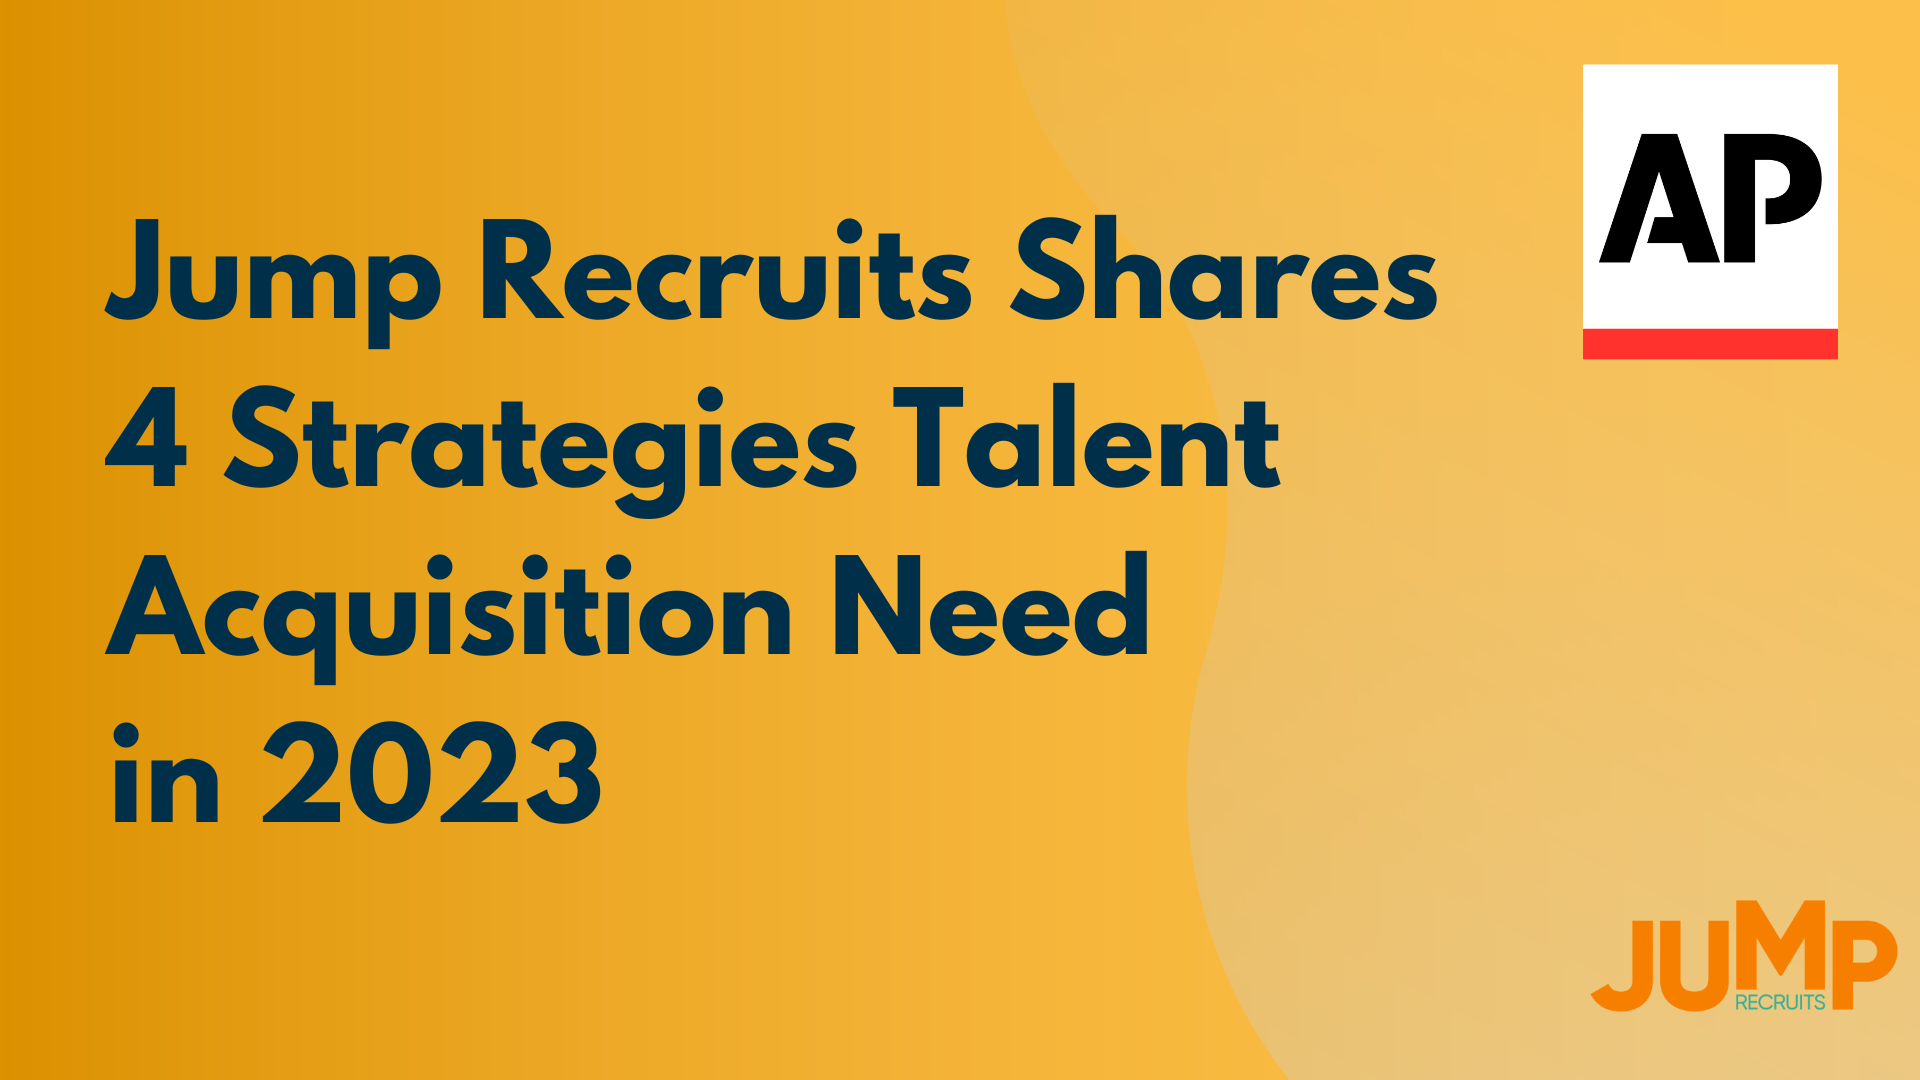 Jump Recruits Shares 4 Strategies Talent Acquisition Need in 2023